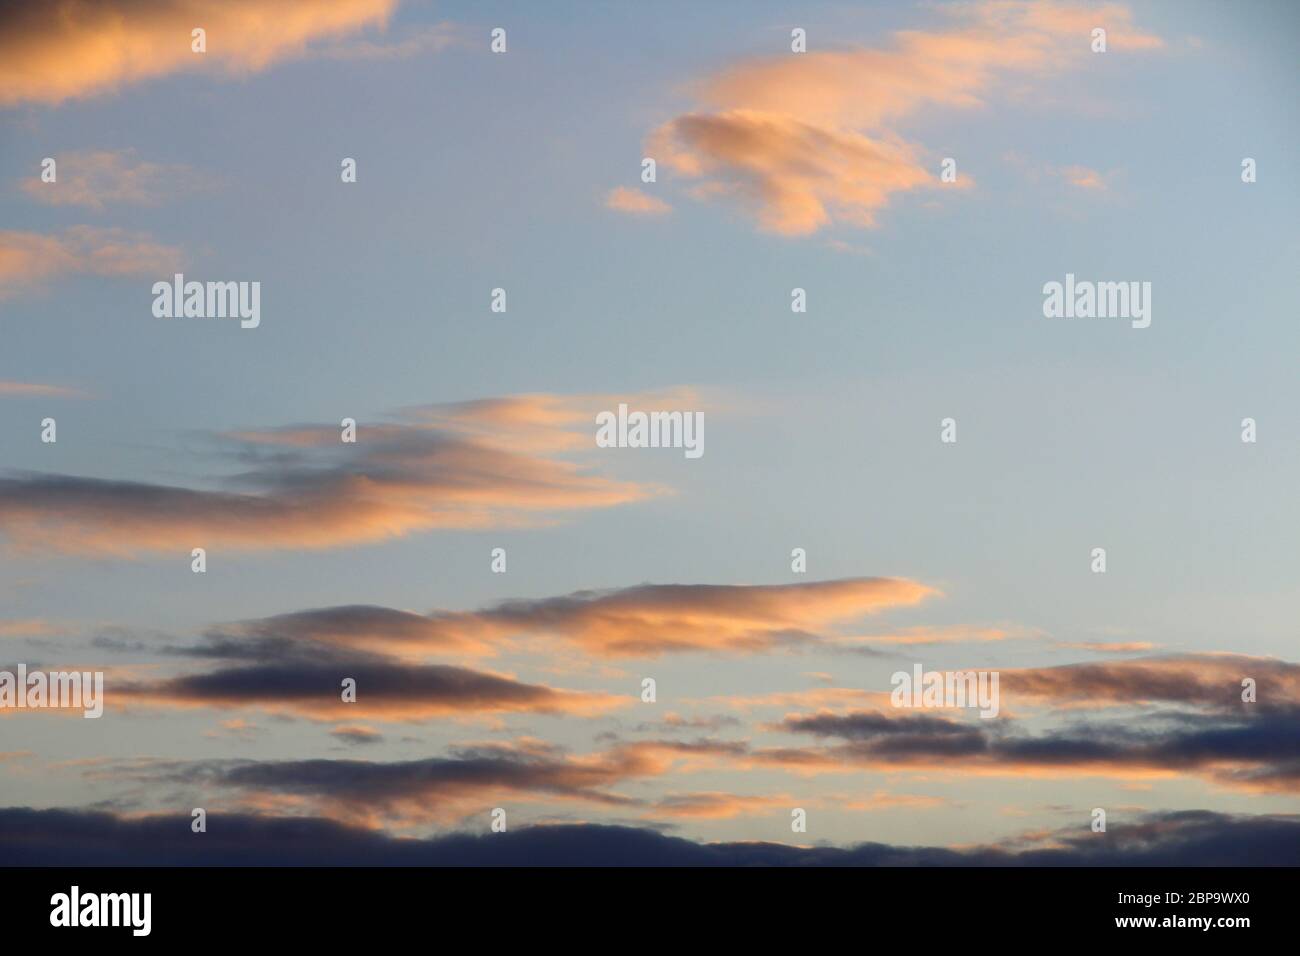 Clouds in the sky are illuminated from below by the red light of the sun. Sunset or sunrise scene at dusk. Stock Photo